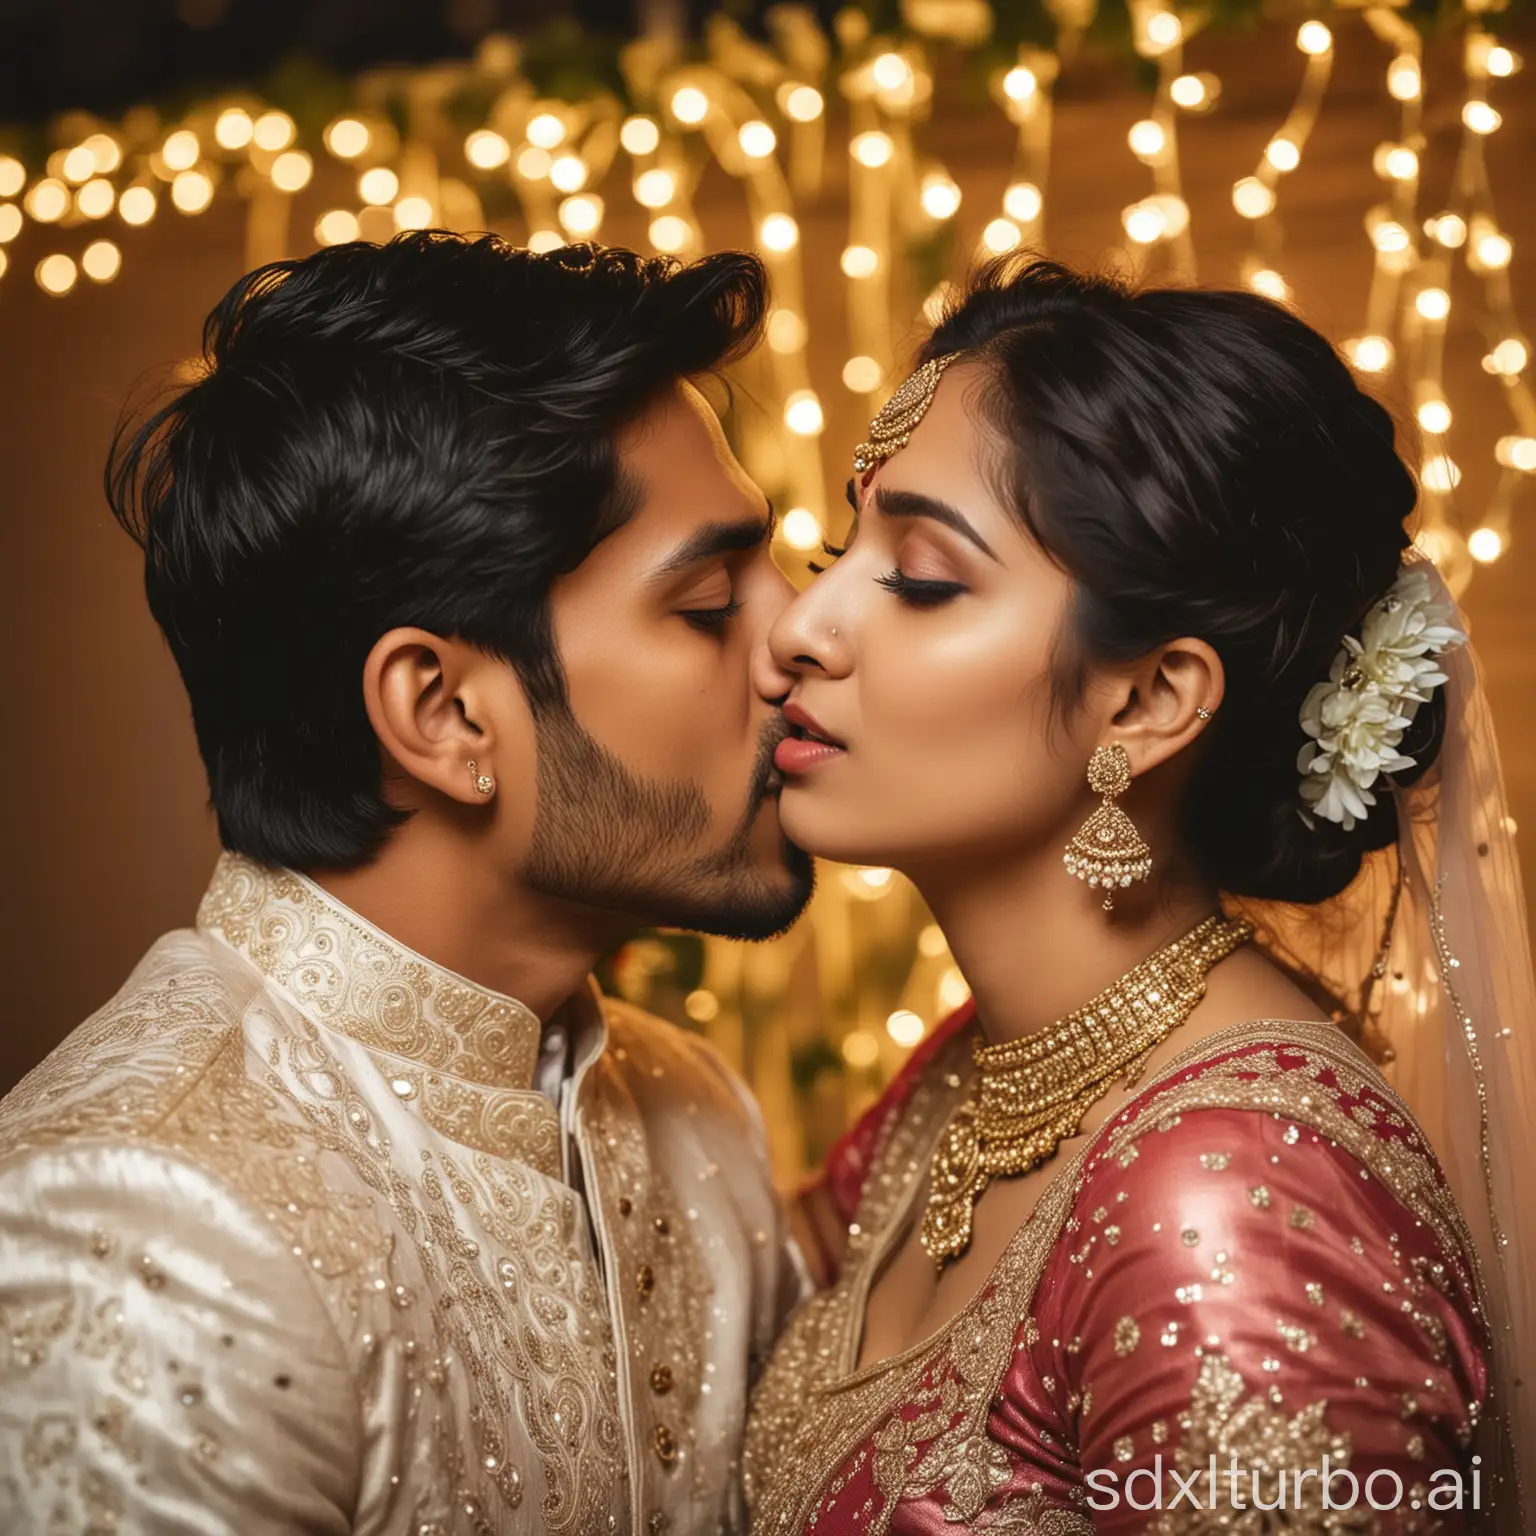 20 years old young indian bride kissing in lip with 25 years old handsome groom, in a engagement, night party lights, at gardern ,